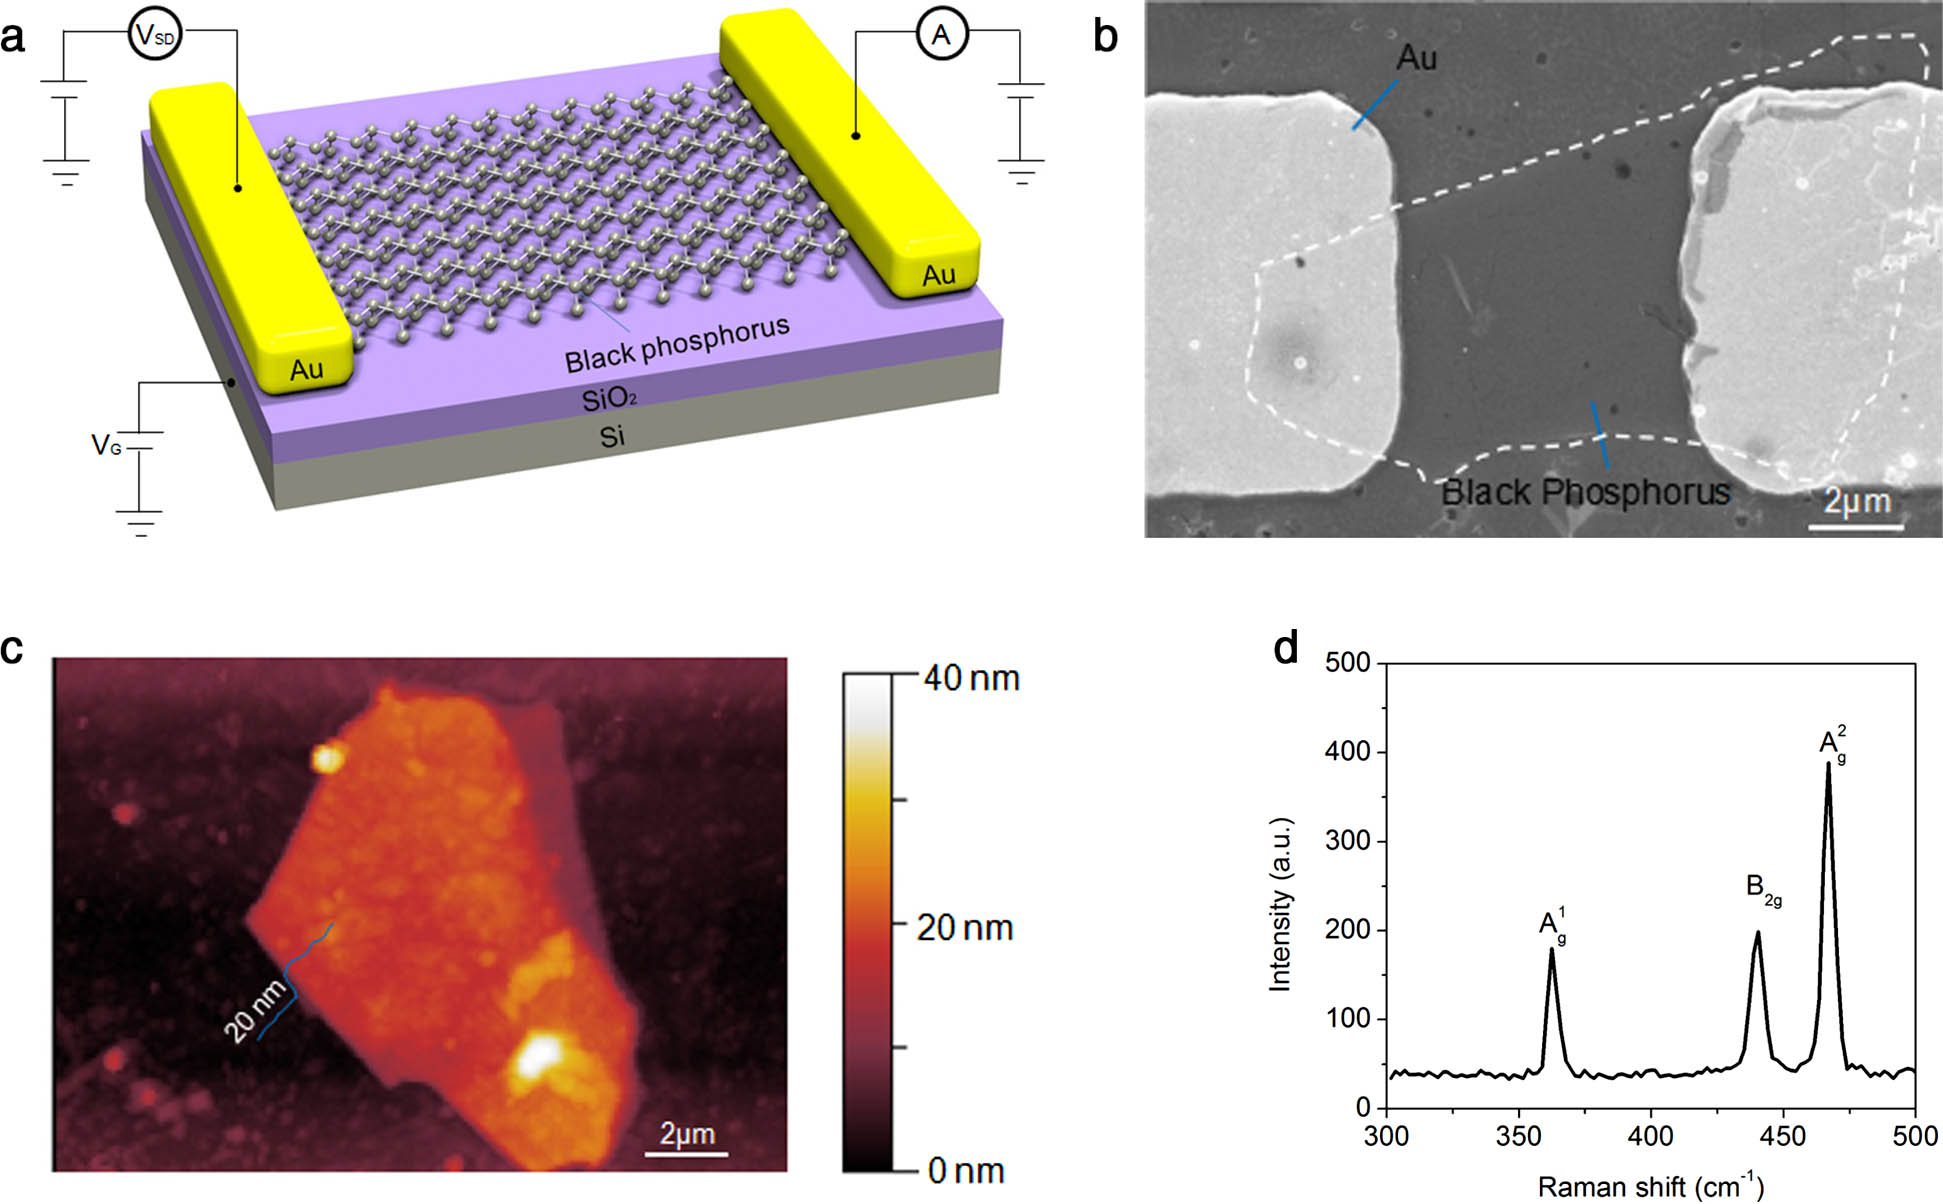 (a) Schematic illustration of the BP photodetector. (b) SEM image of the BP photodetector with Au electrodes. (c) AFM image of BP nanoflakes showing a thickness of ∼20 nm. (d) Representative Raman spectrum of BP.